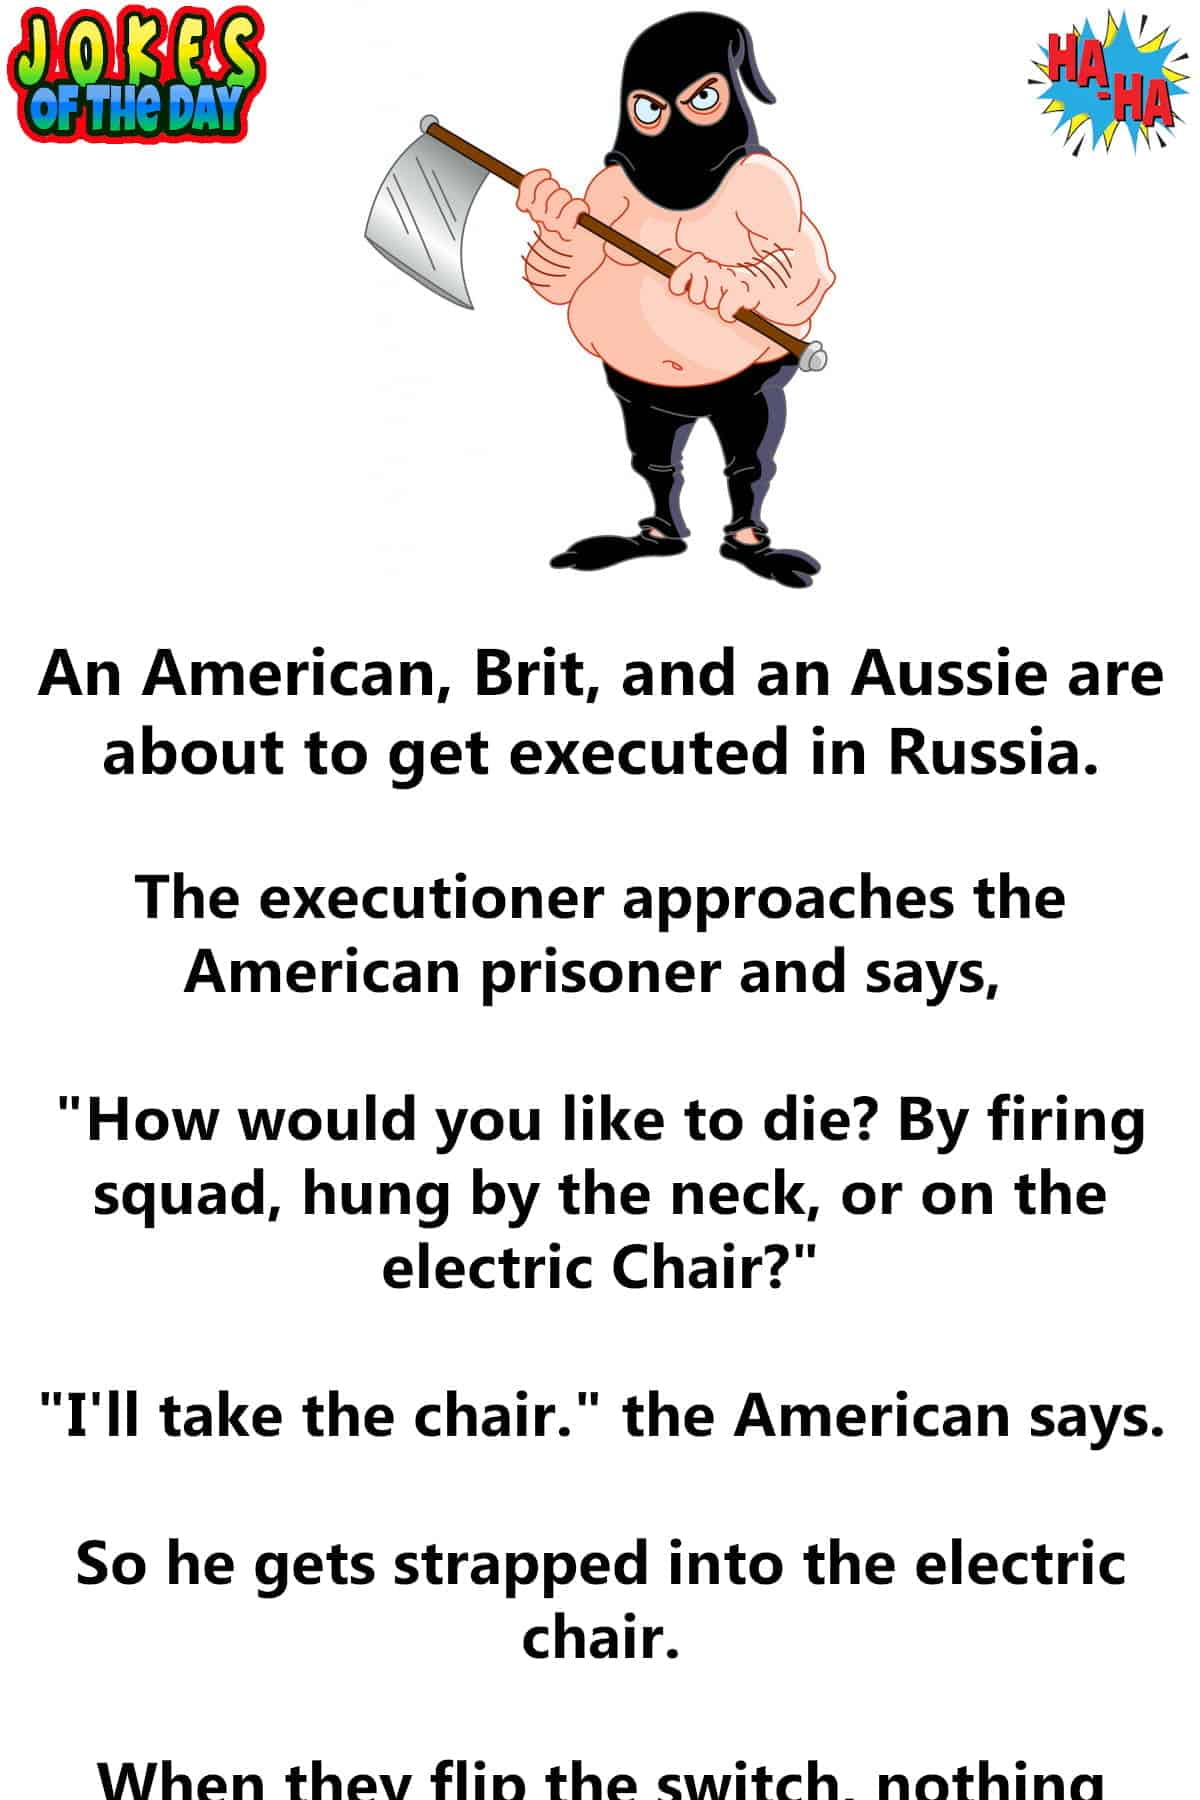 Jokesoftheday com - Funny Joke - An American, Brit, and an Aussie are about to get executed in Russia